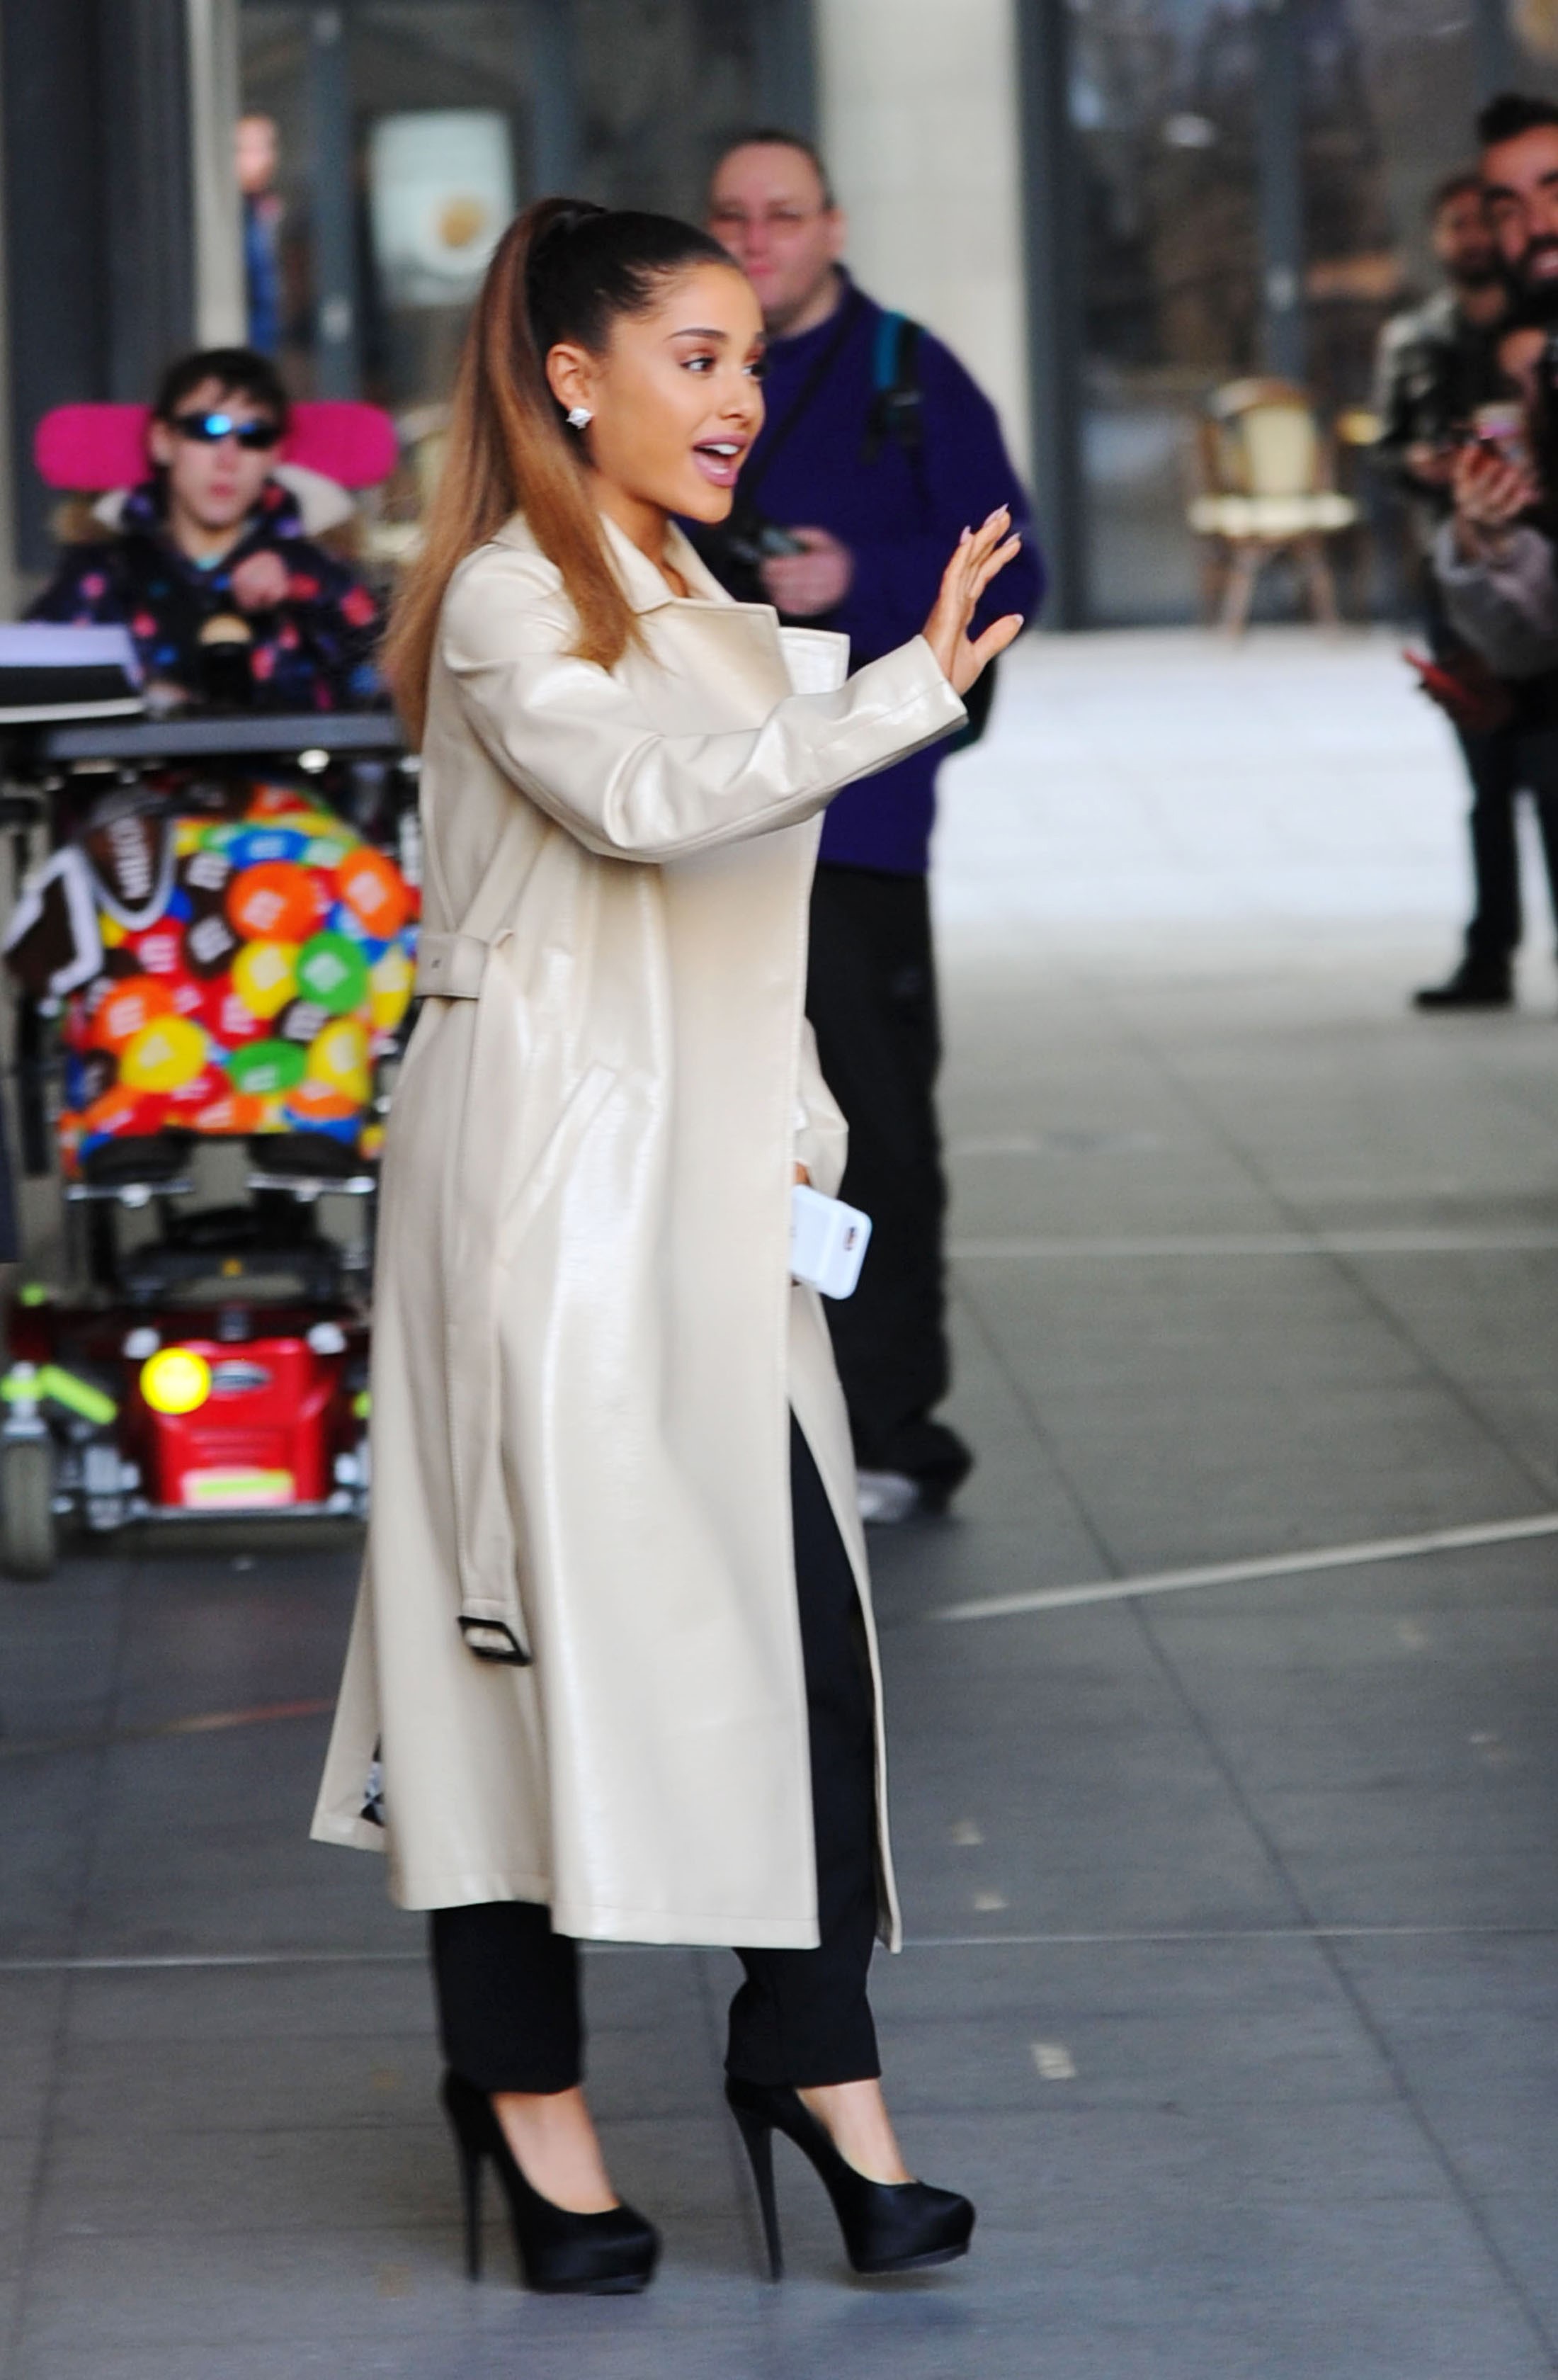 The 9 Best Ariana Grande Outfits of the 